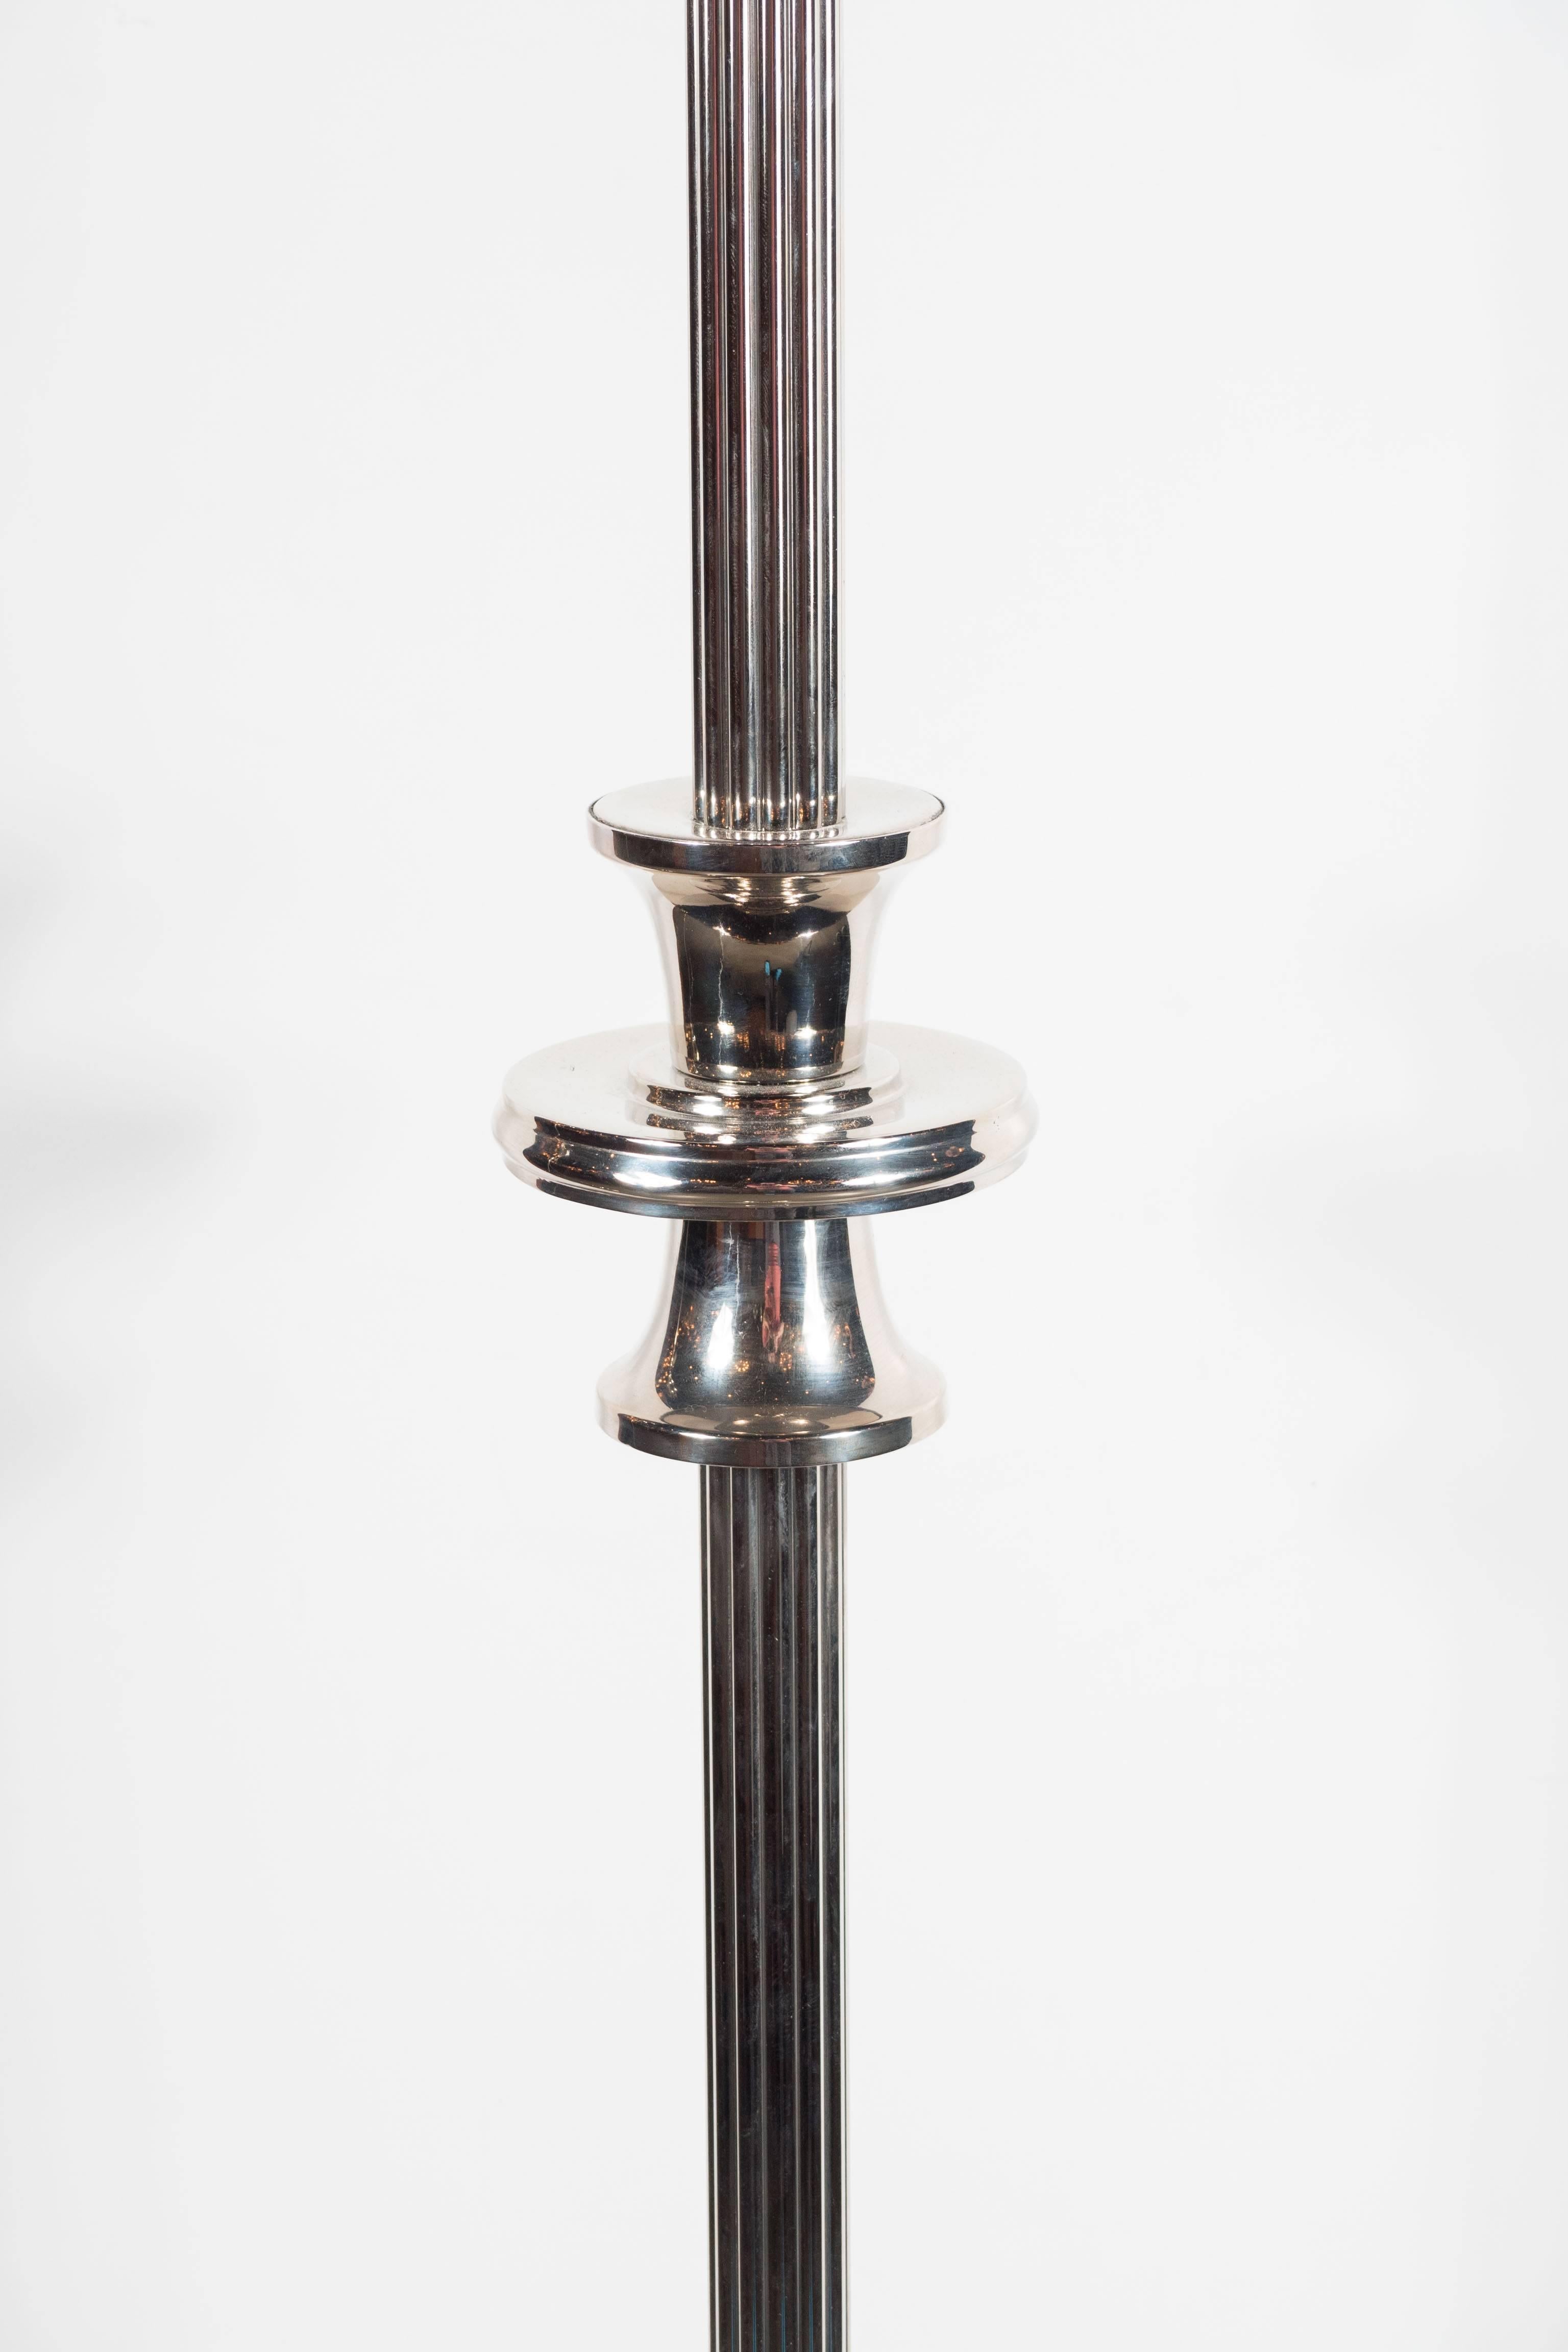 American Pair of Art Deco Movie Theatre Lobby Floor Lamps in Polished Nickel and Aluminum